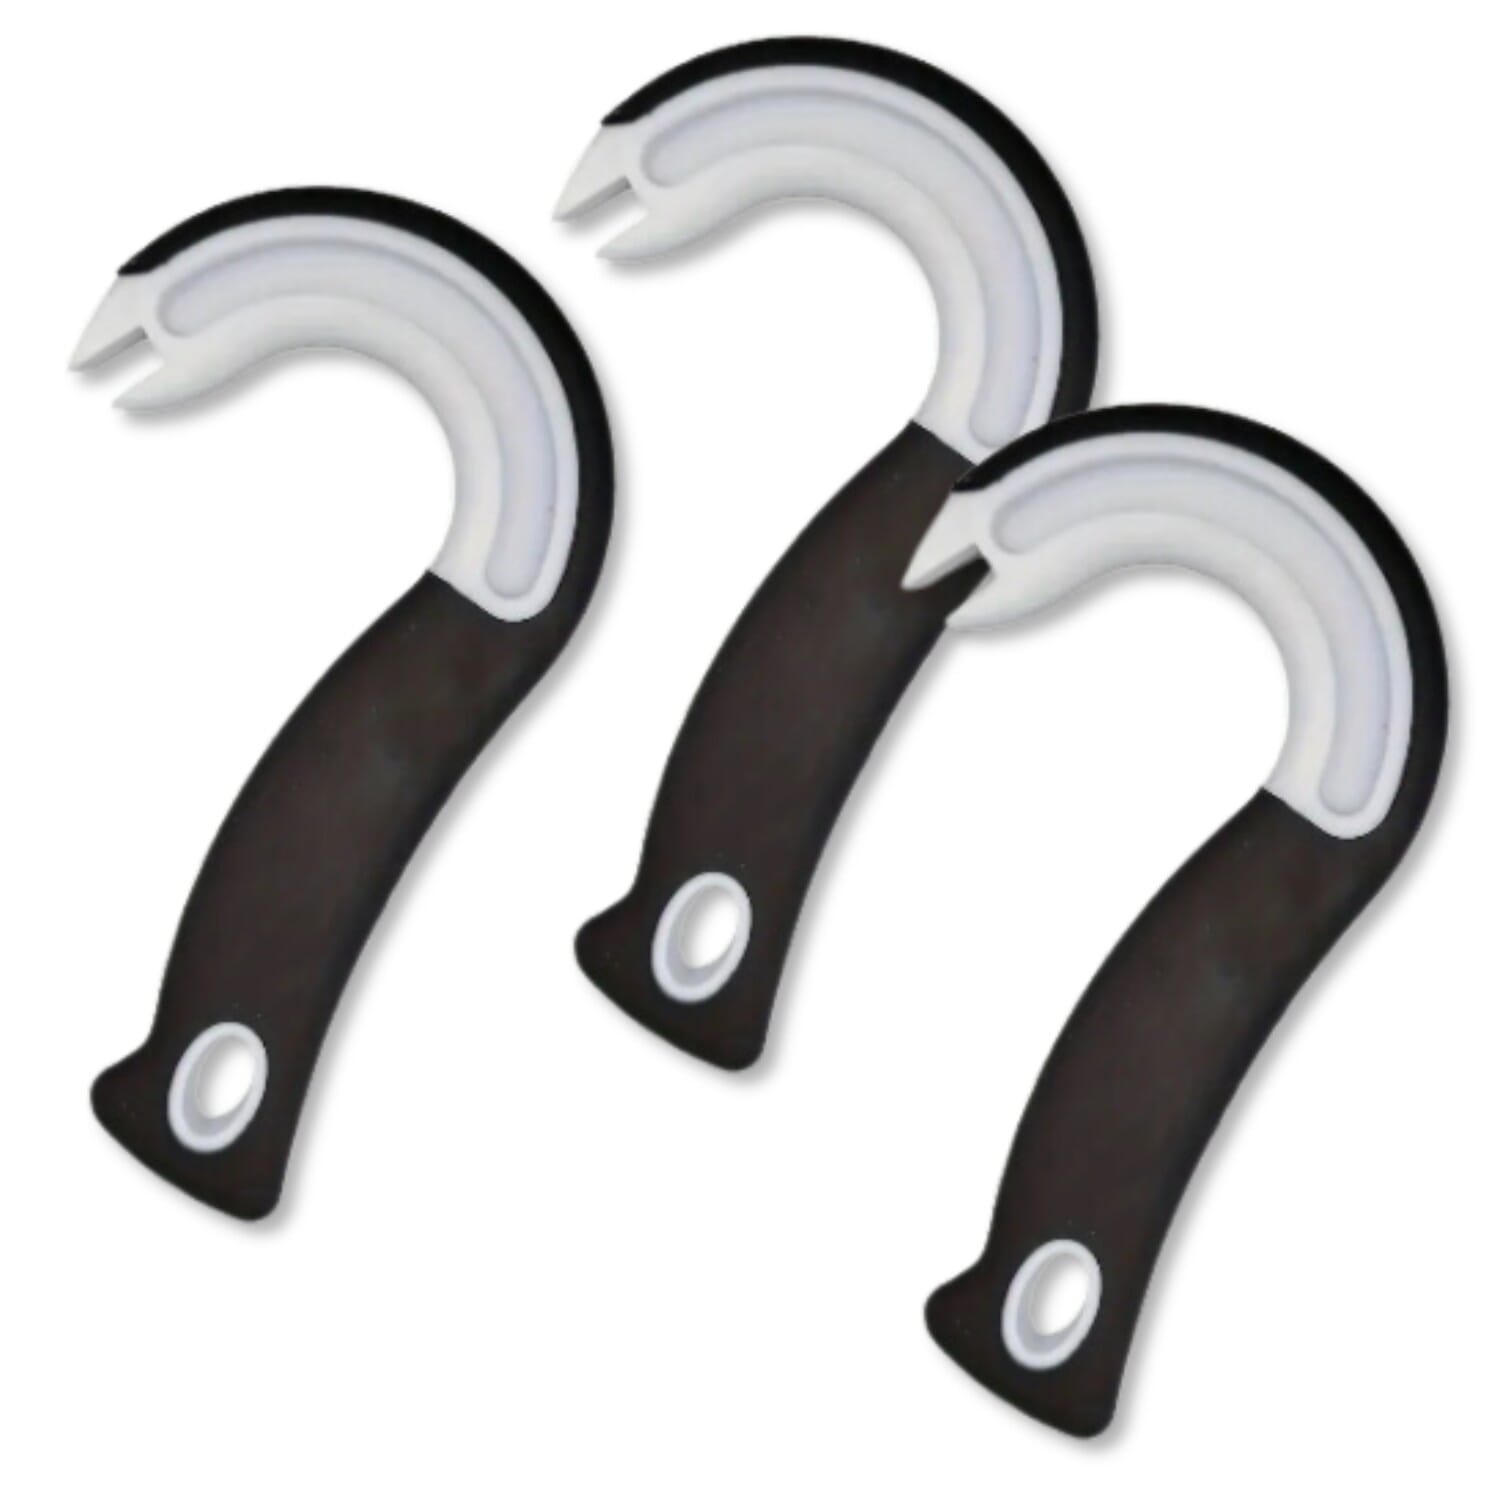 View Ring Pull Can Opener Pack of 3 information